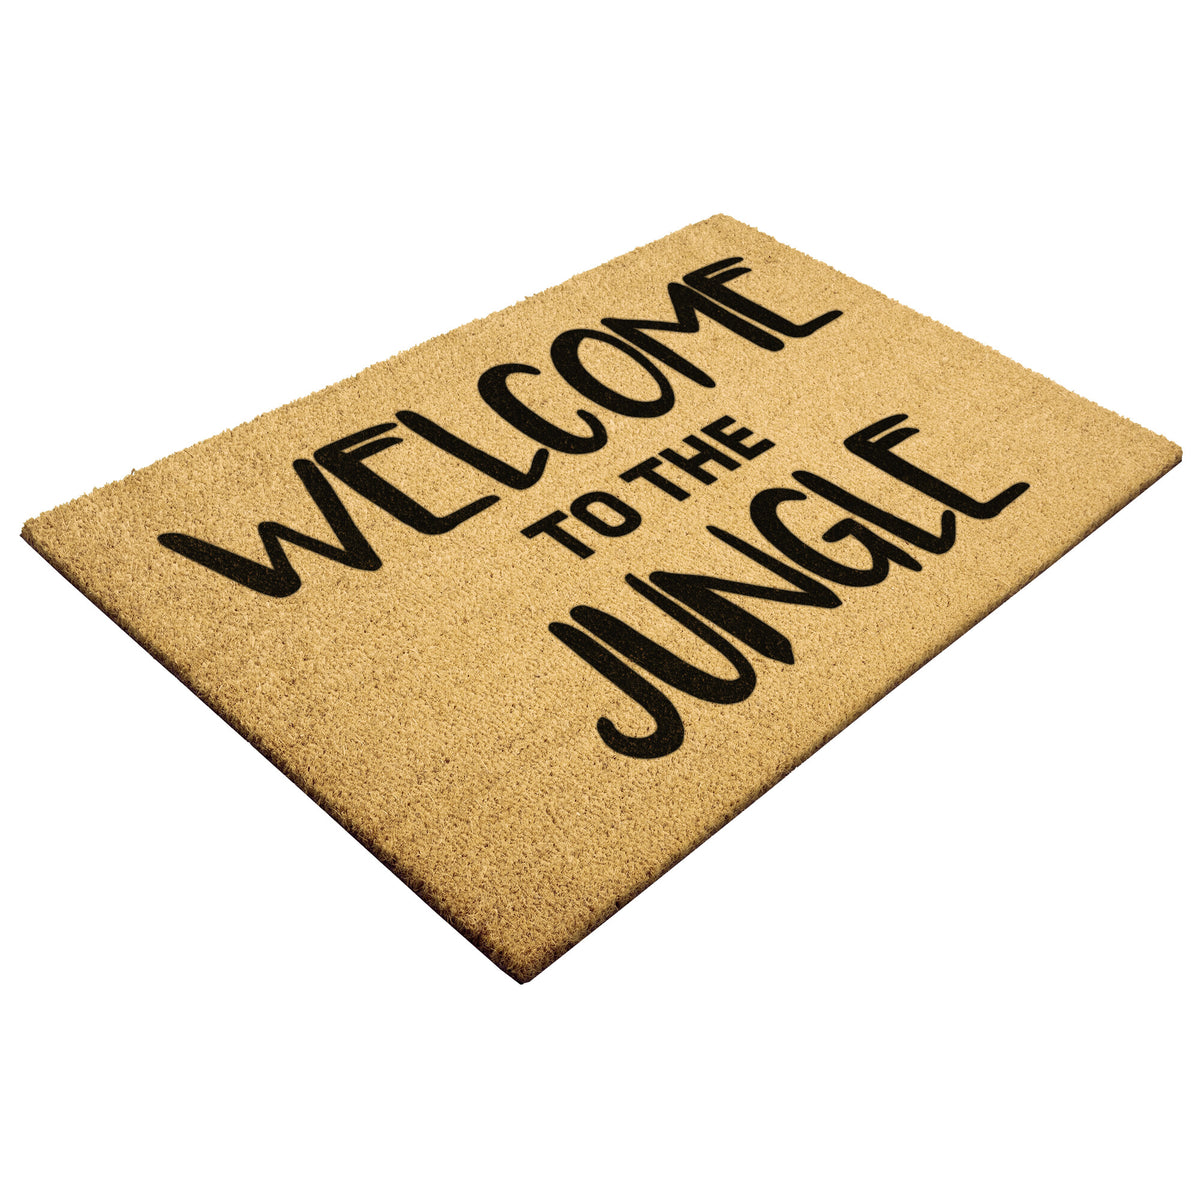 Welcome to the Jungle Doormat